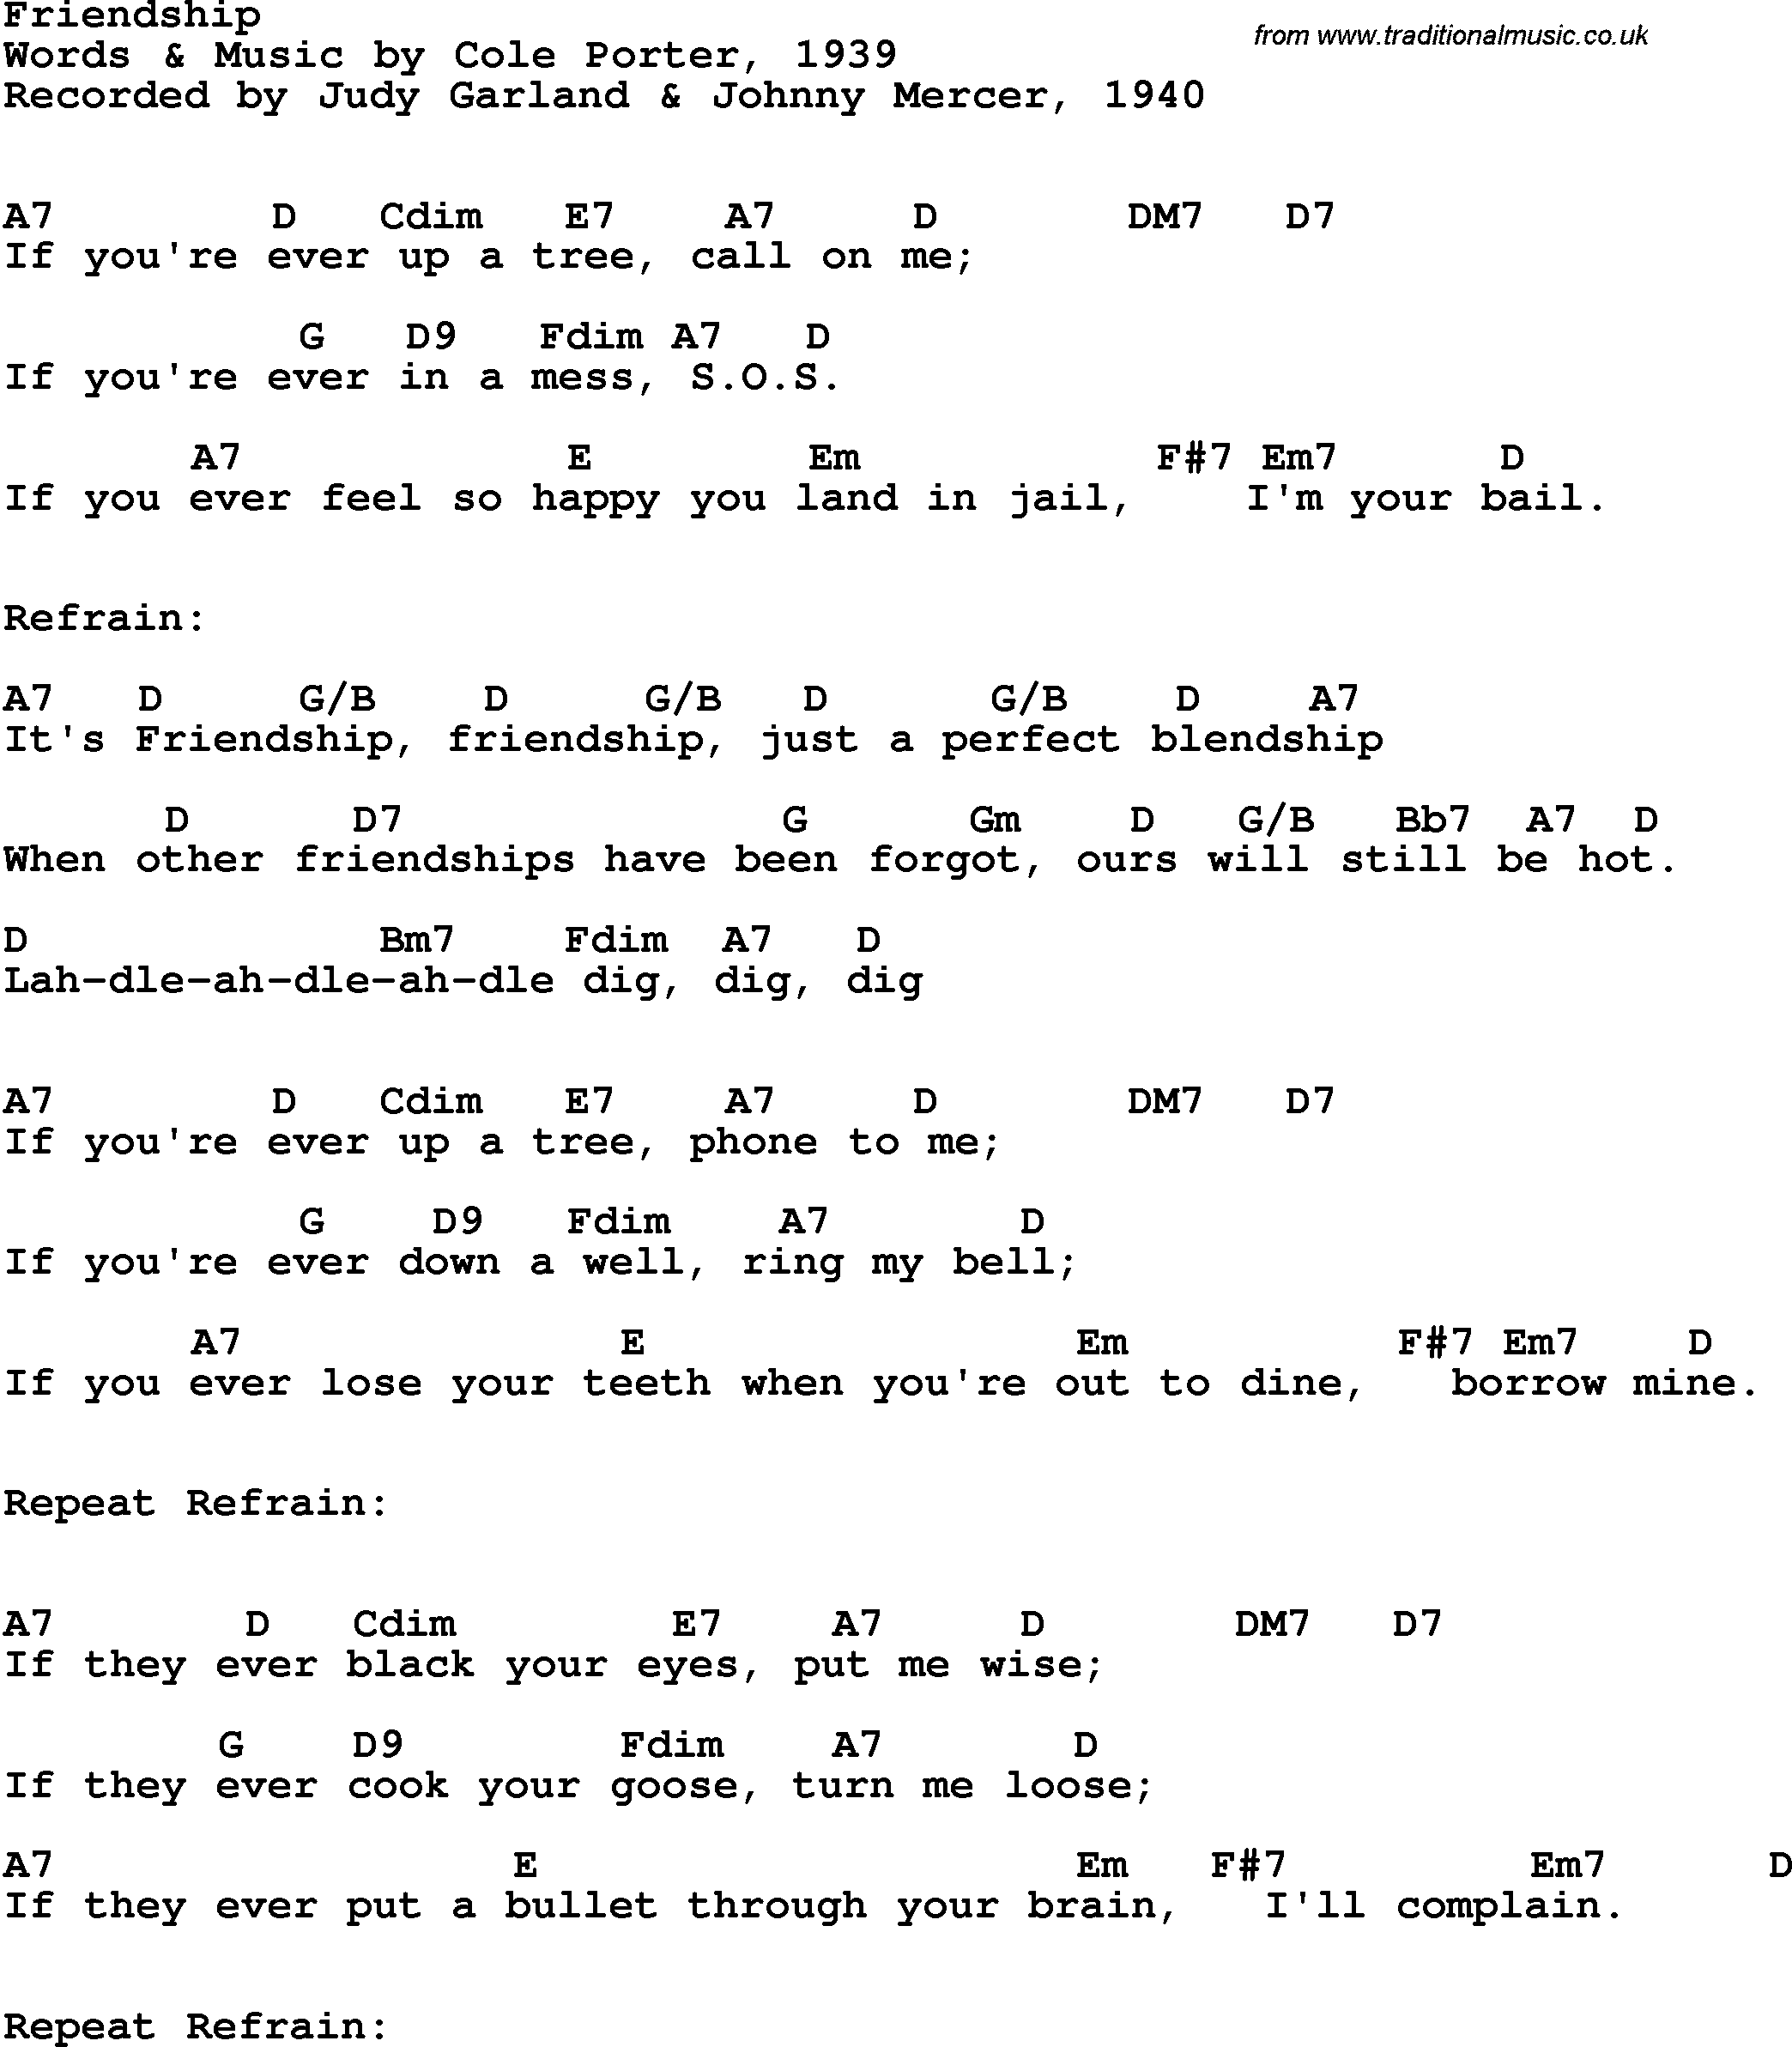 Song Lyrics with guitar chords for Friendship - Judy Garland & Johnny Mercer, 1940